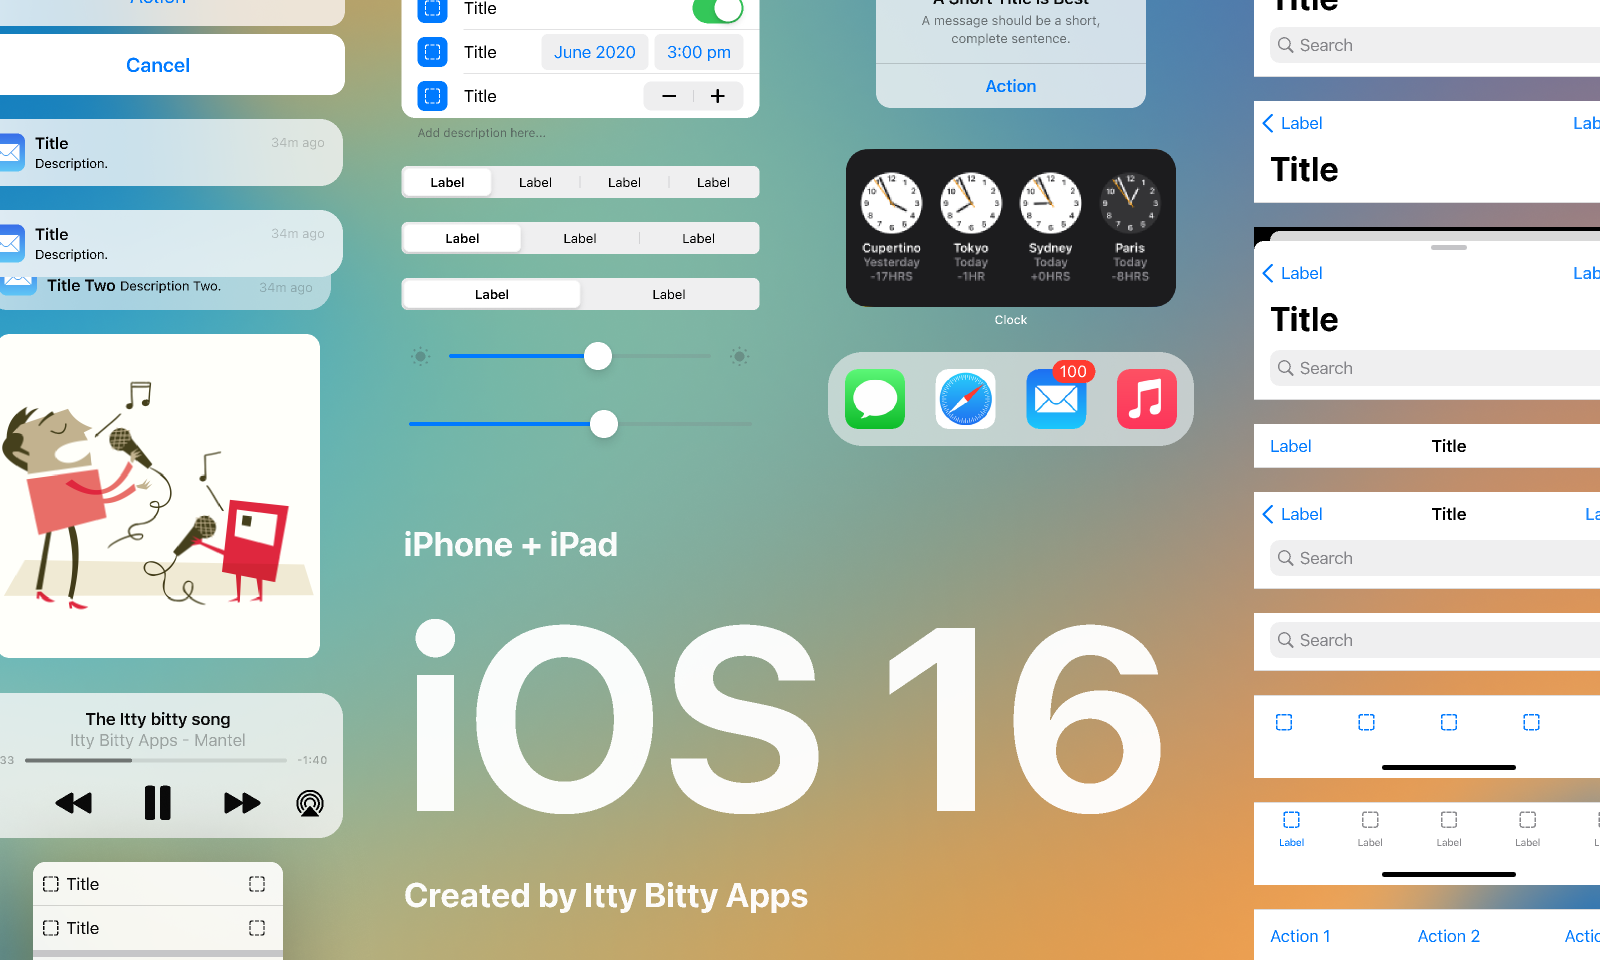 Introducing our iOS UI kit